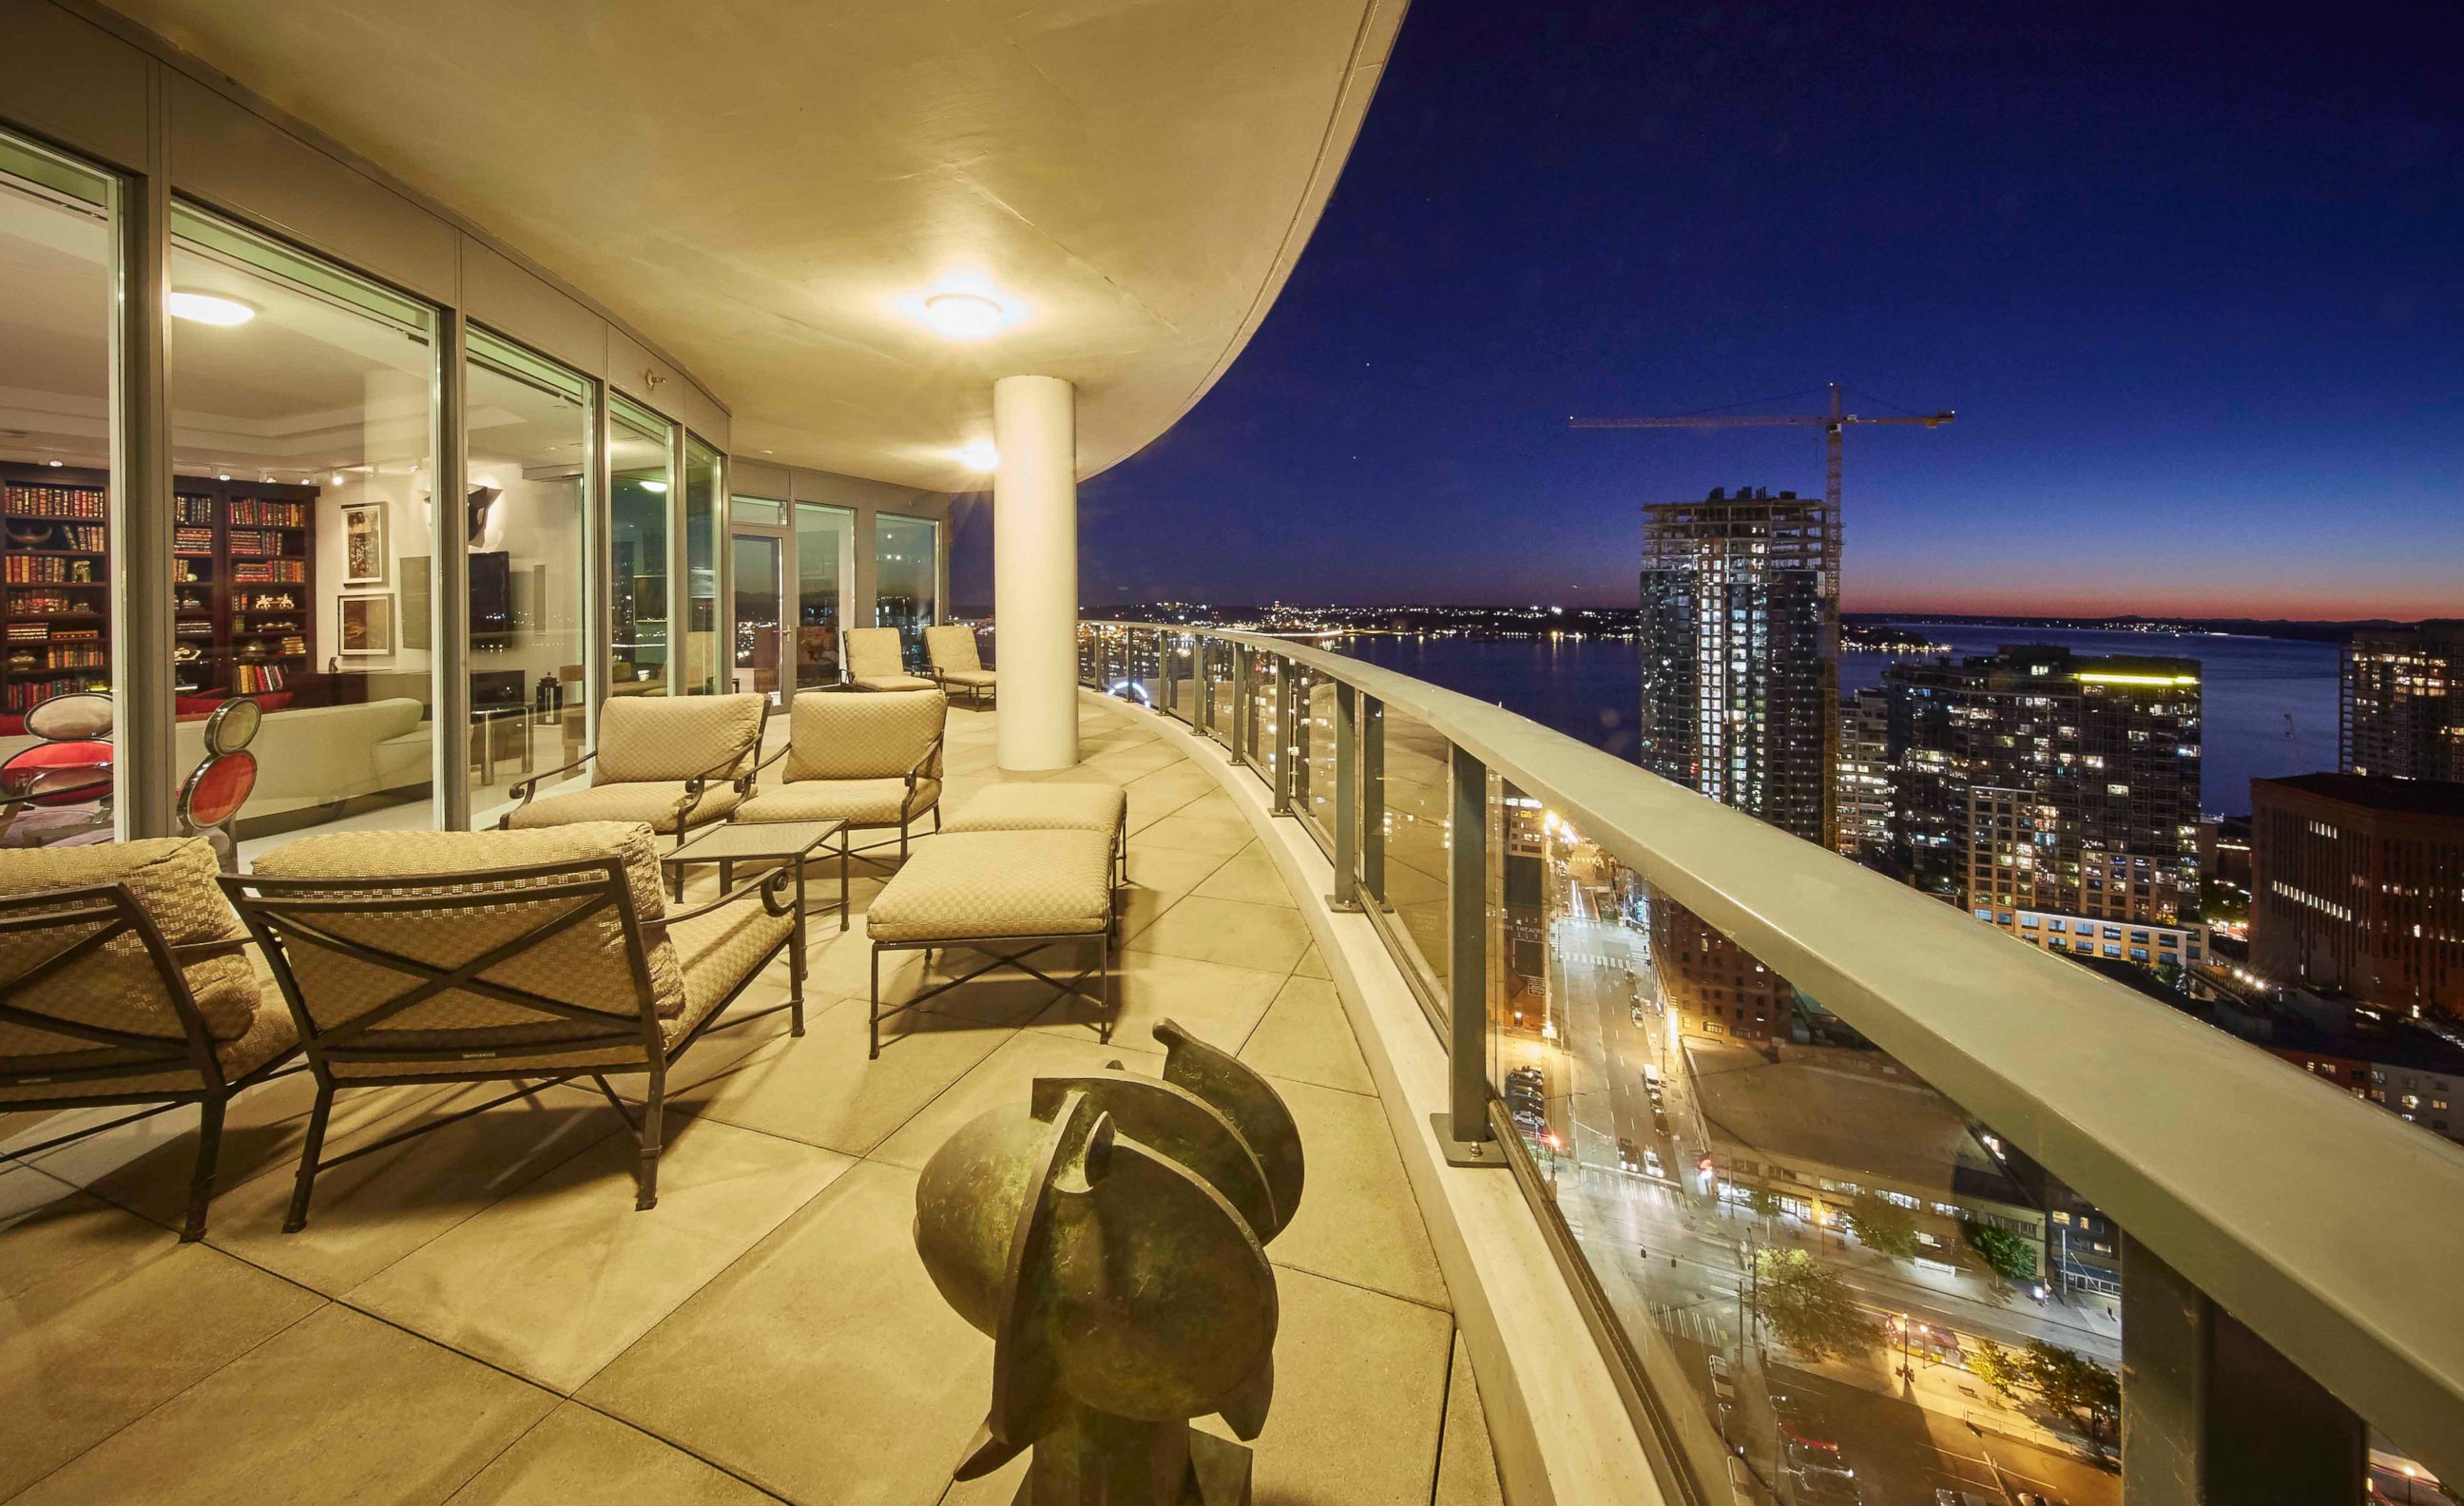 PHOTO: A penthouse apartment that inspired the novel "Fifty Shades of Grey" went up for sale this week in Seattle, Washington. 